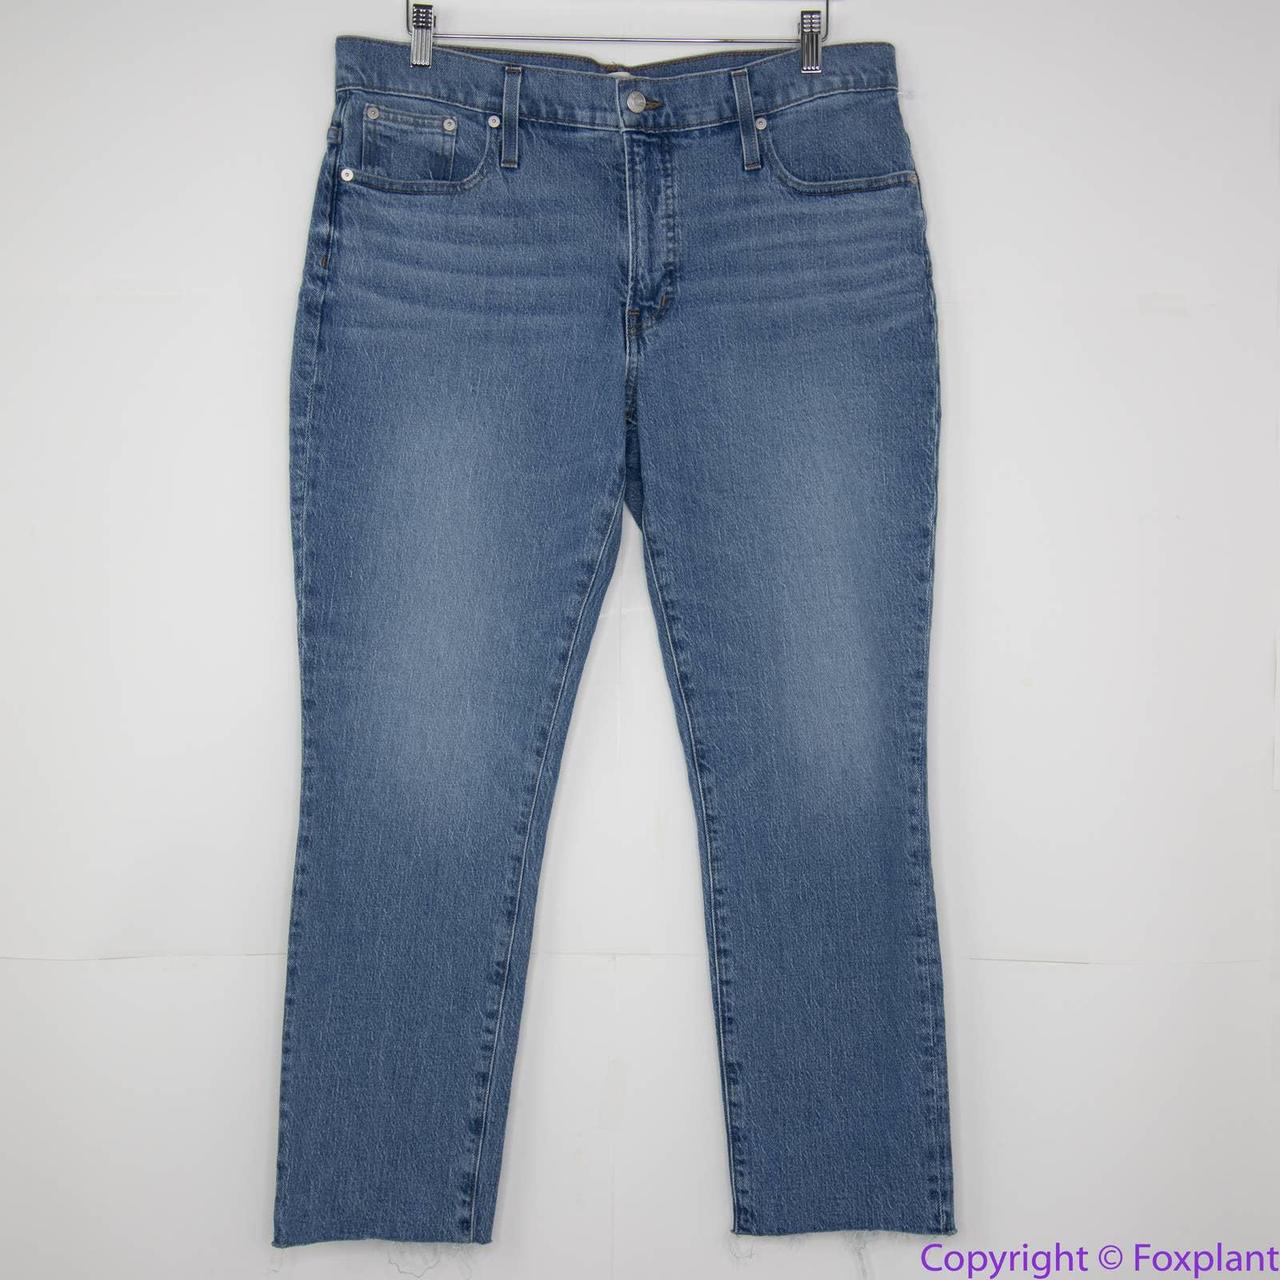 Madewell The Mid-Rise Perfect Vintage Jean in Enmore - Depop